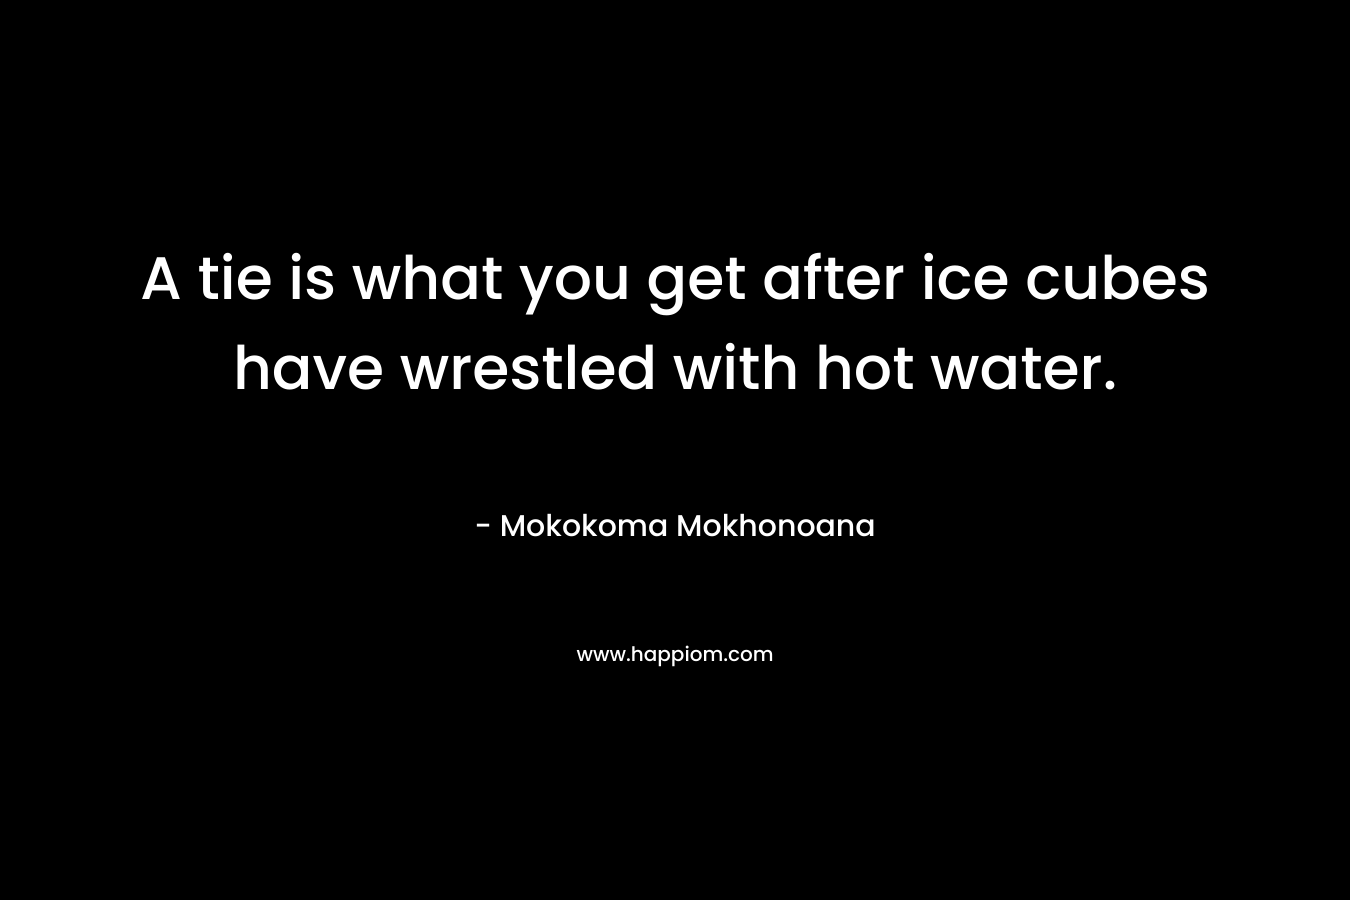 A tie is what you get after ice cubes have wrestled with hot water. – Mokokoma Mokhonoana